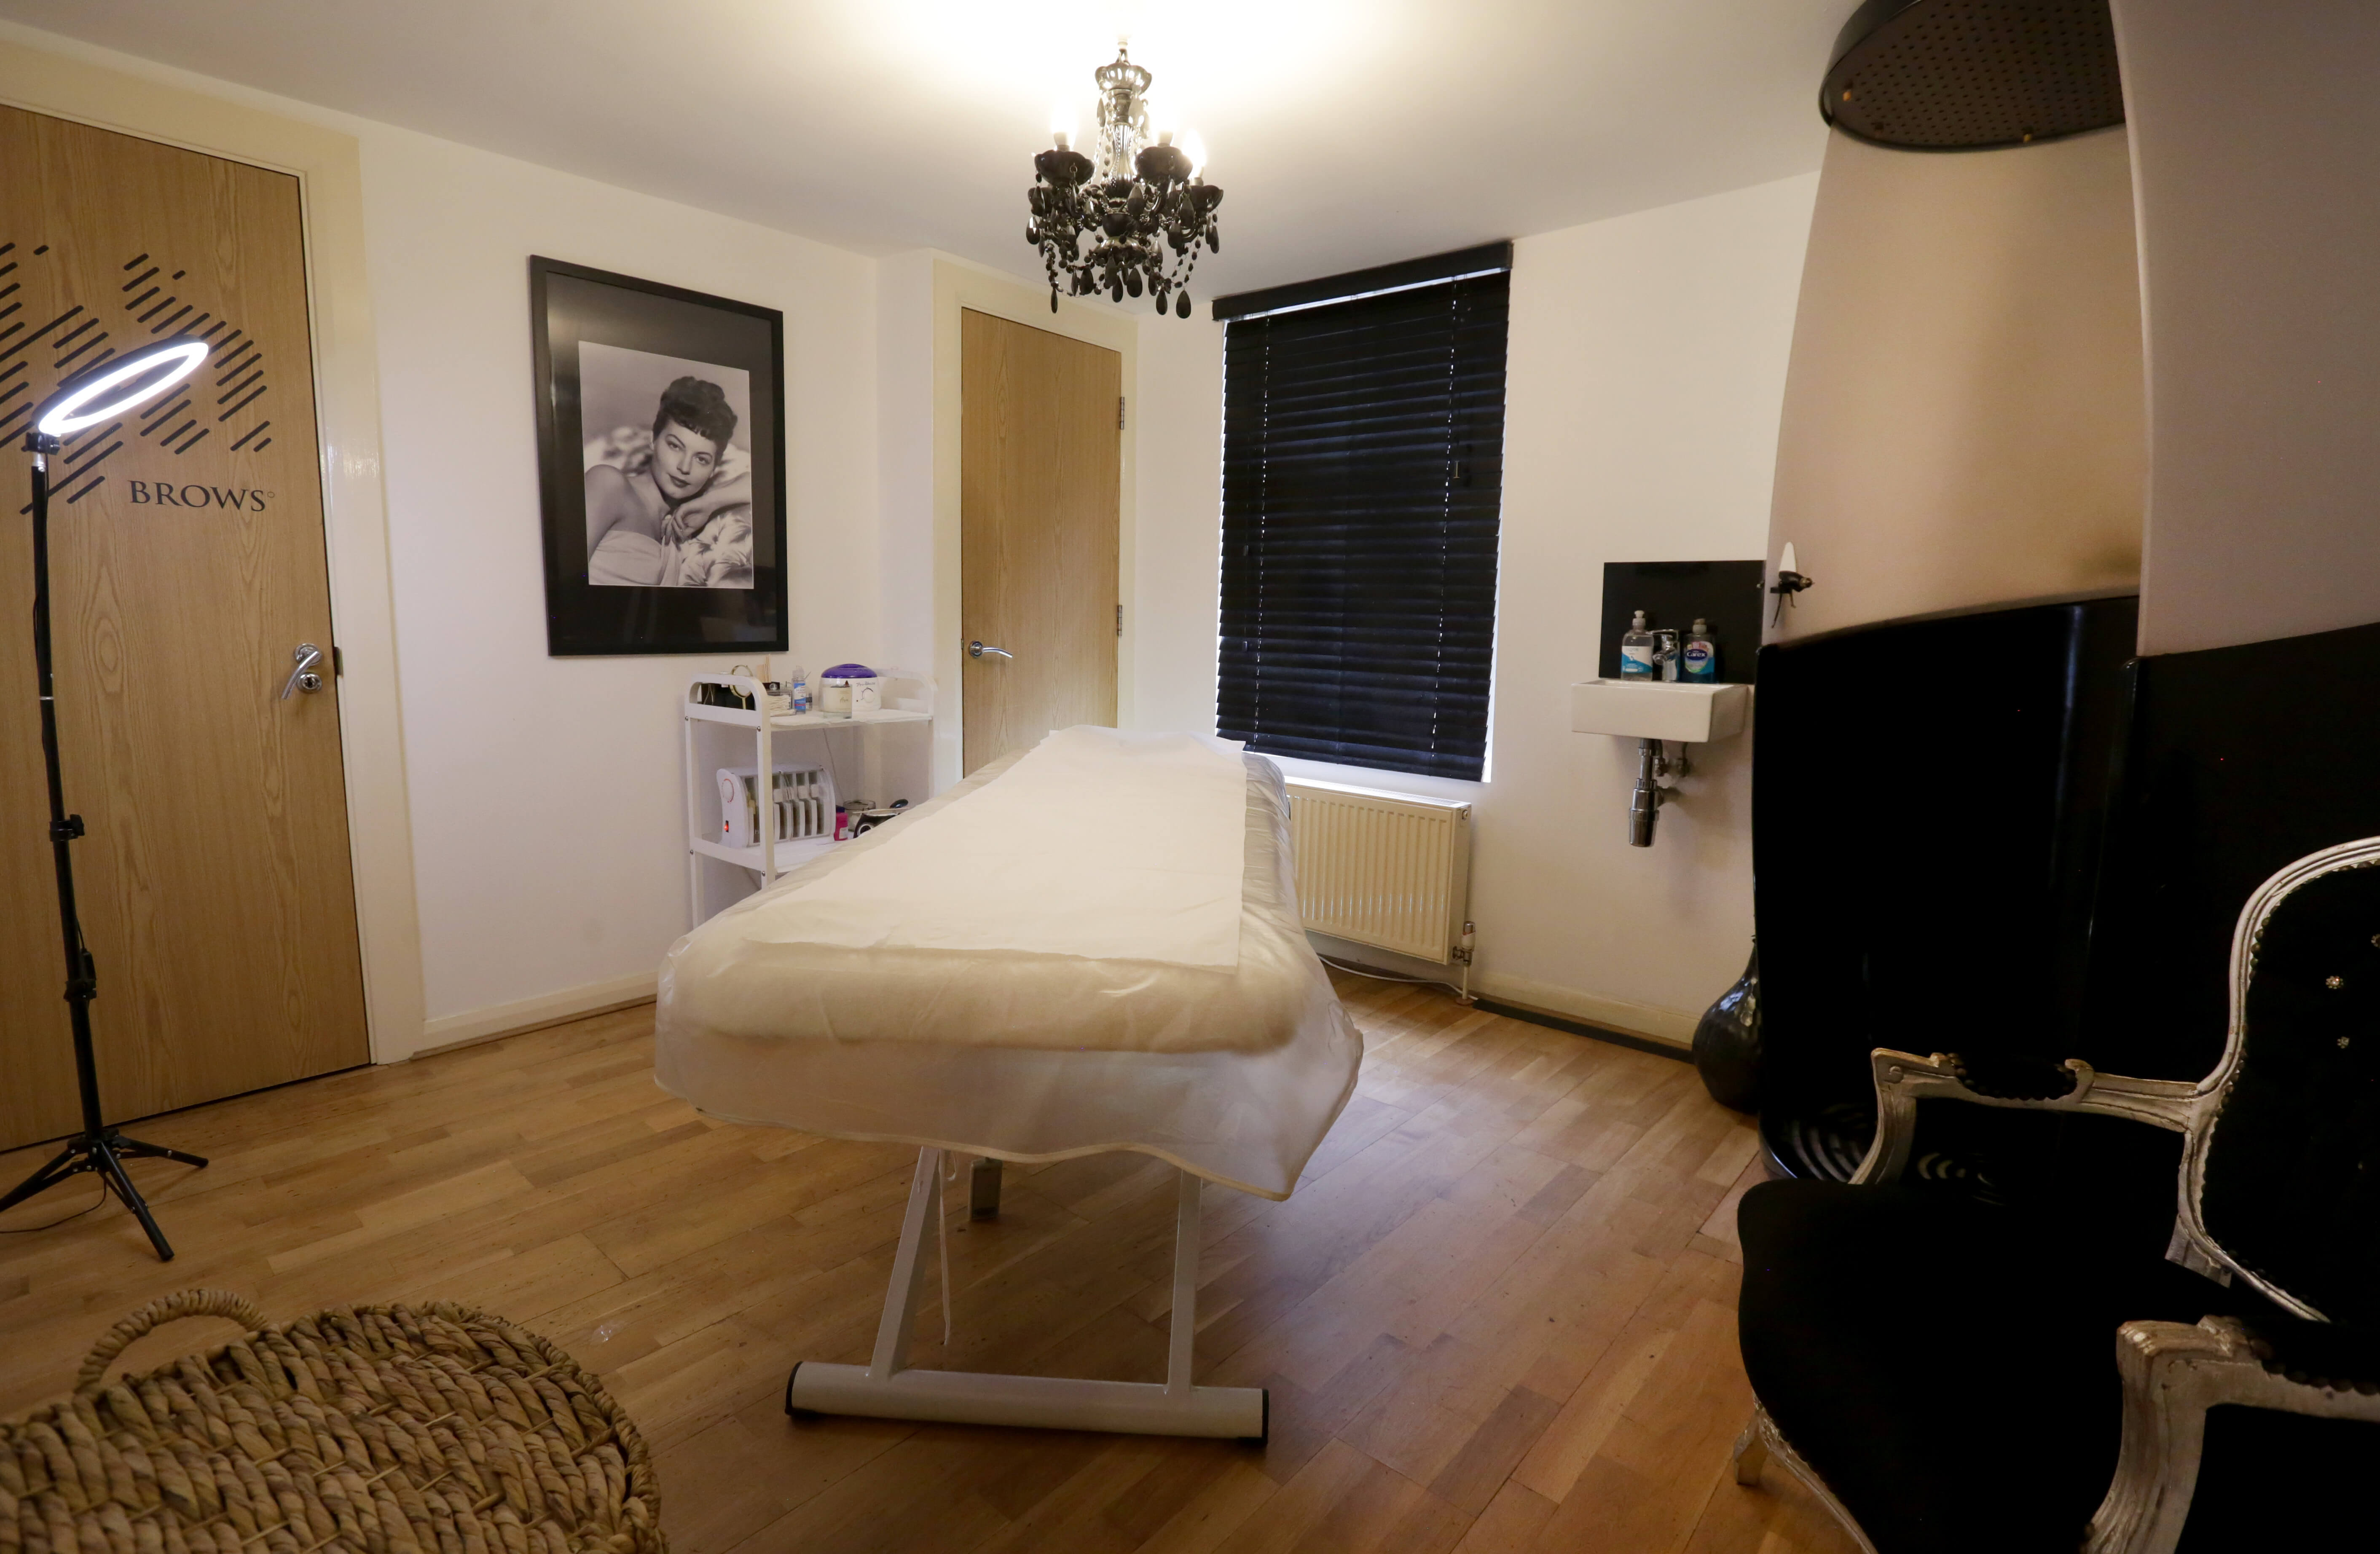 our treatment rooms